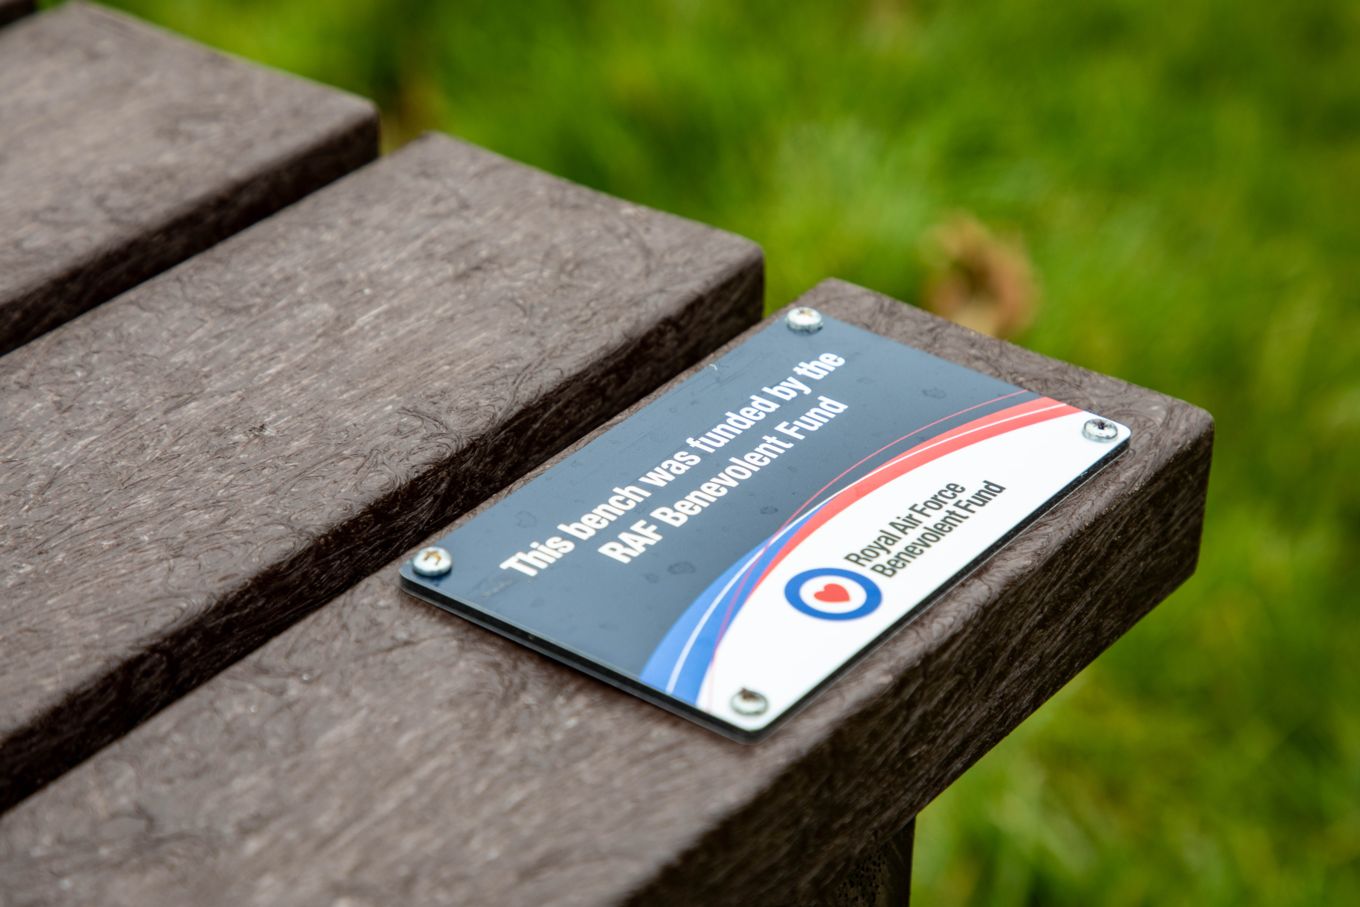 A plaque showing the RAFBF logo